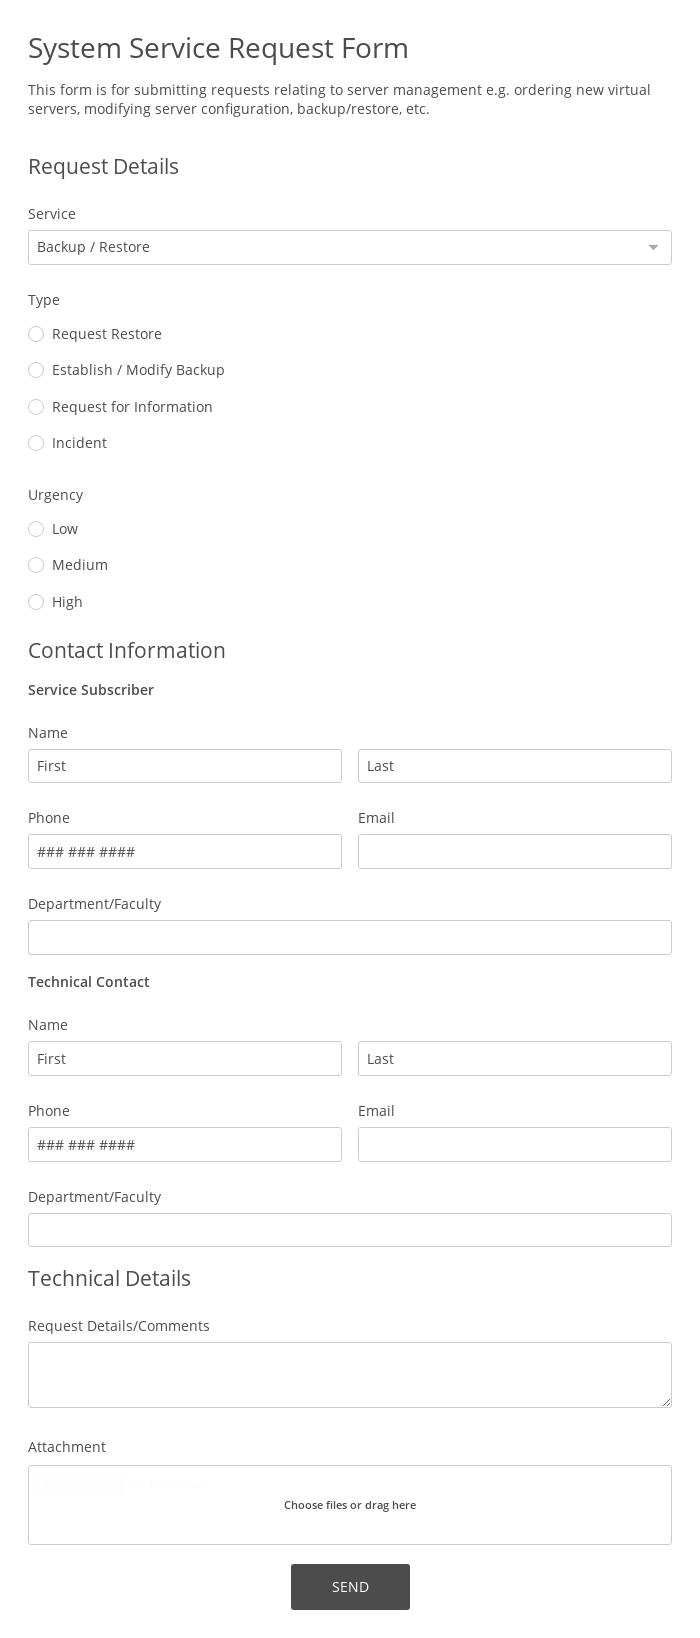 System Service Request Form